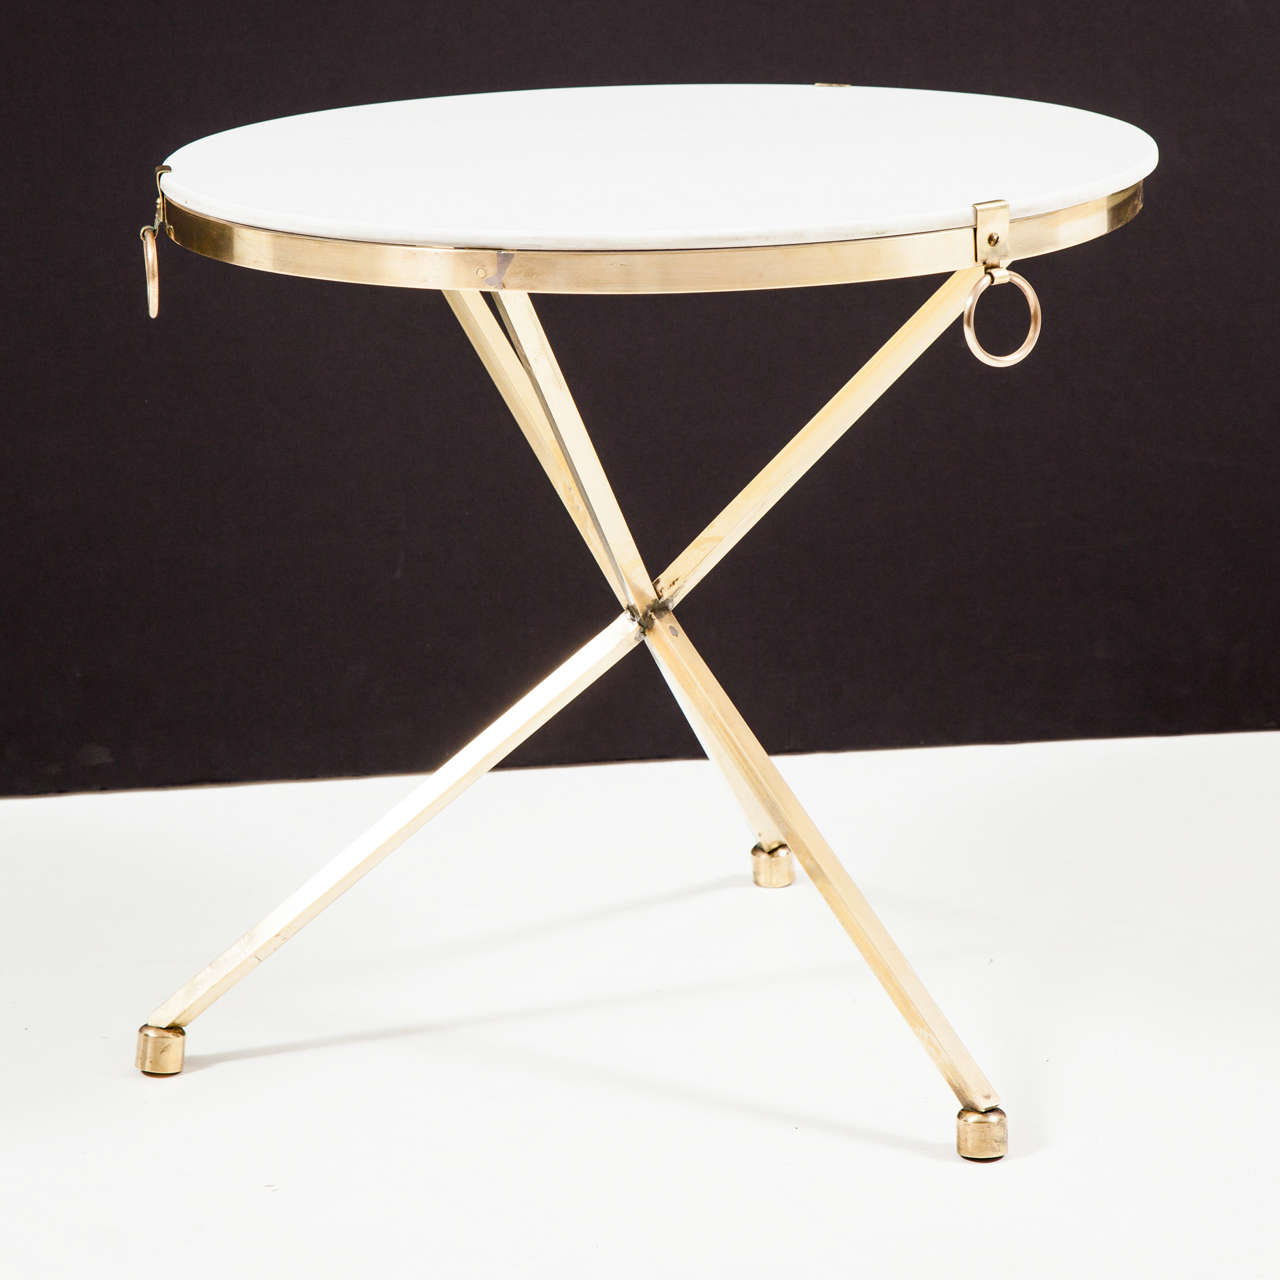 Hand-forged brass tripod table supports an opaque whie glass top. American, ca 1950. New polished, otherwise original condition. 

This item can be seen at our showroom, 1stDibs@NYDC, 200 Lexington Ave, Tenth Floor.